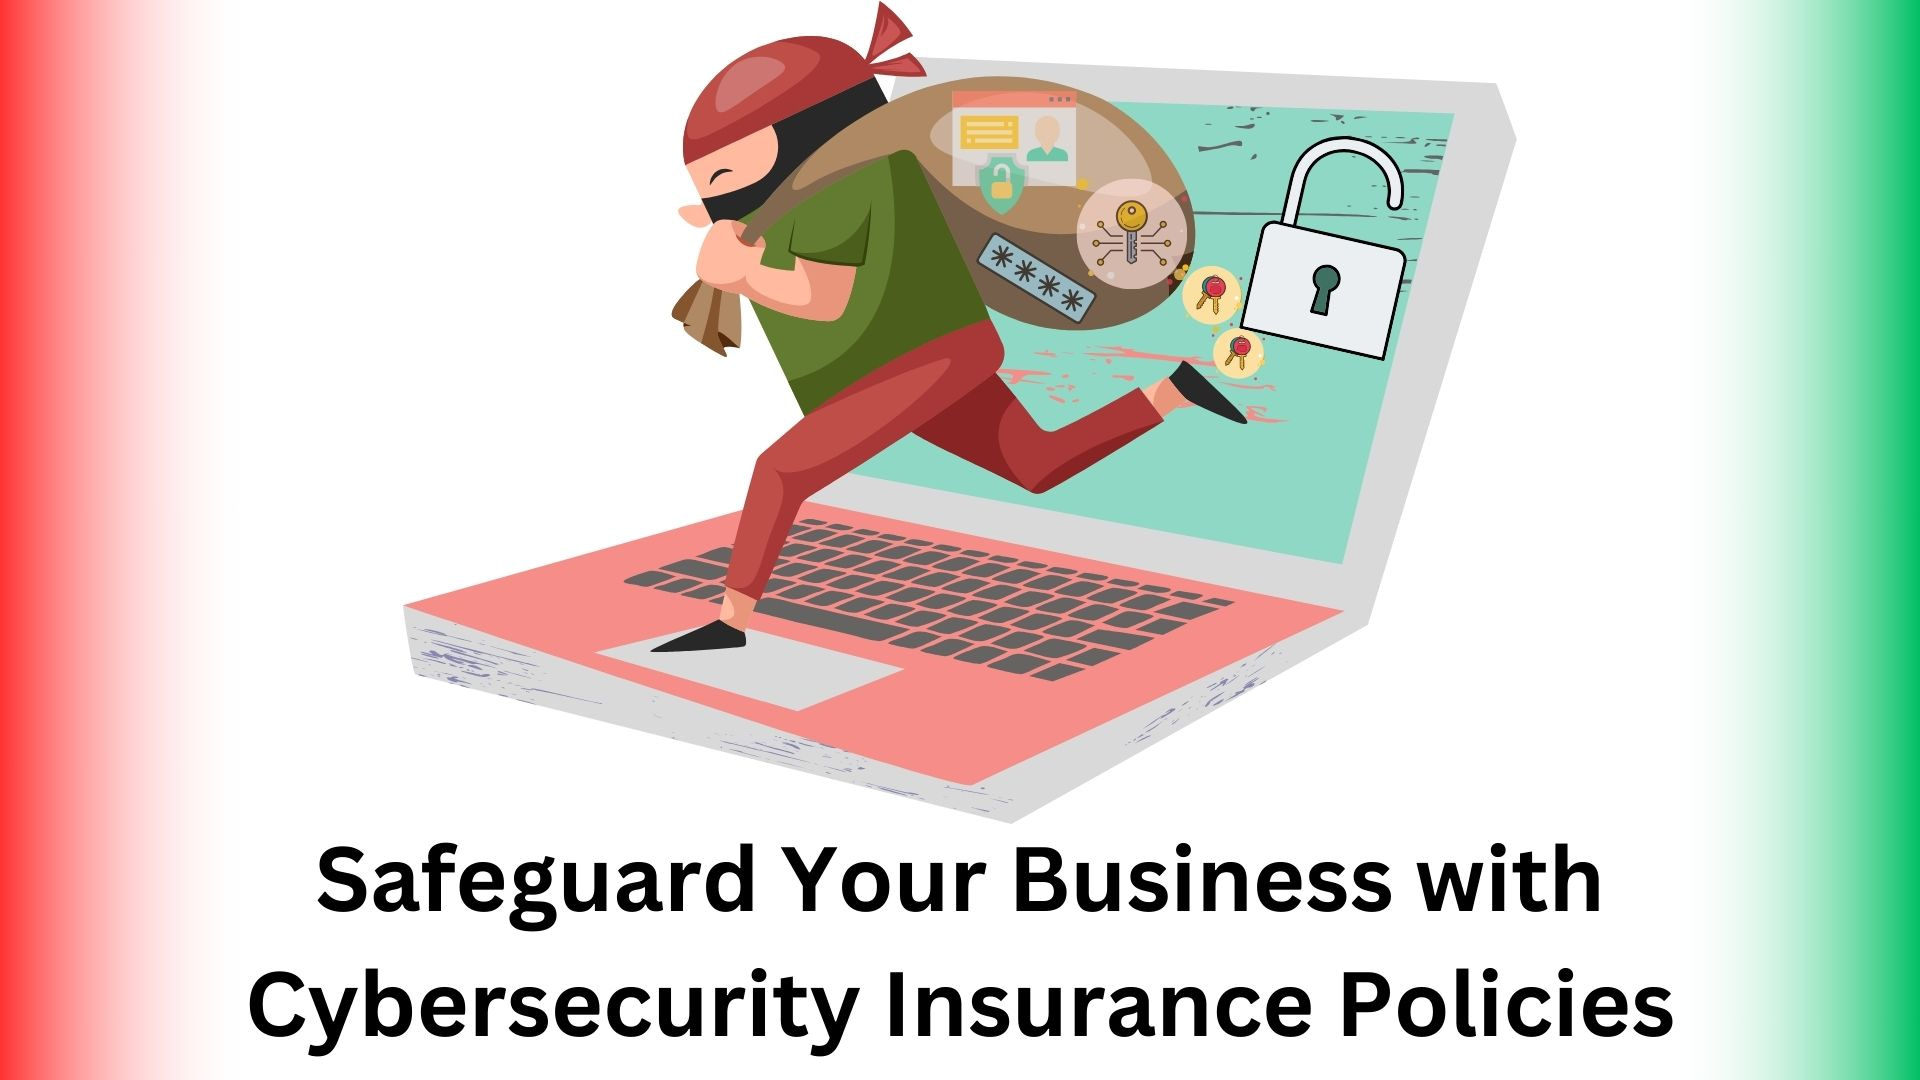 Cybersecurity insurance policies